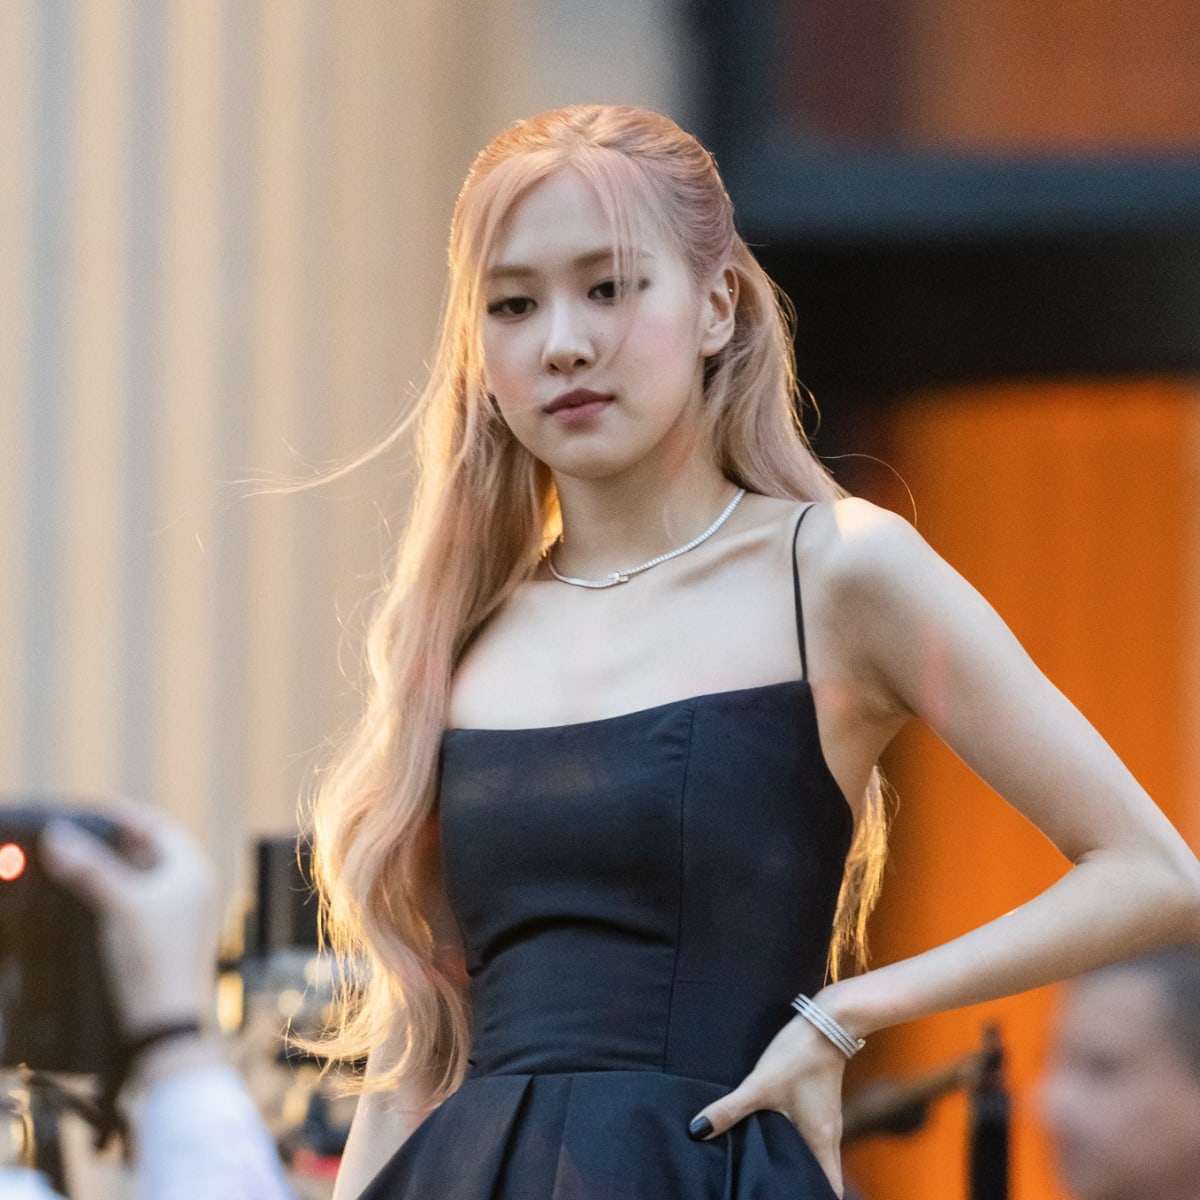 Rosé Channels 'Breakfast at Tiffany's' for a Night at the Museum - Fashionista